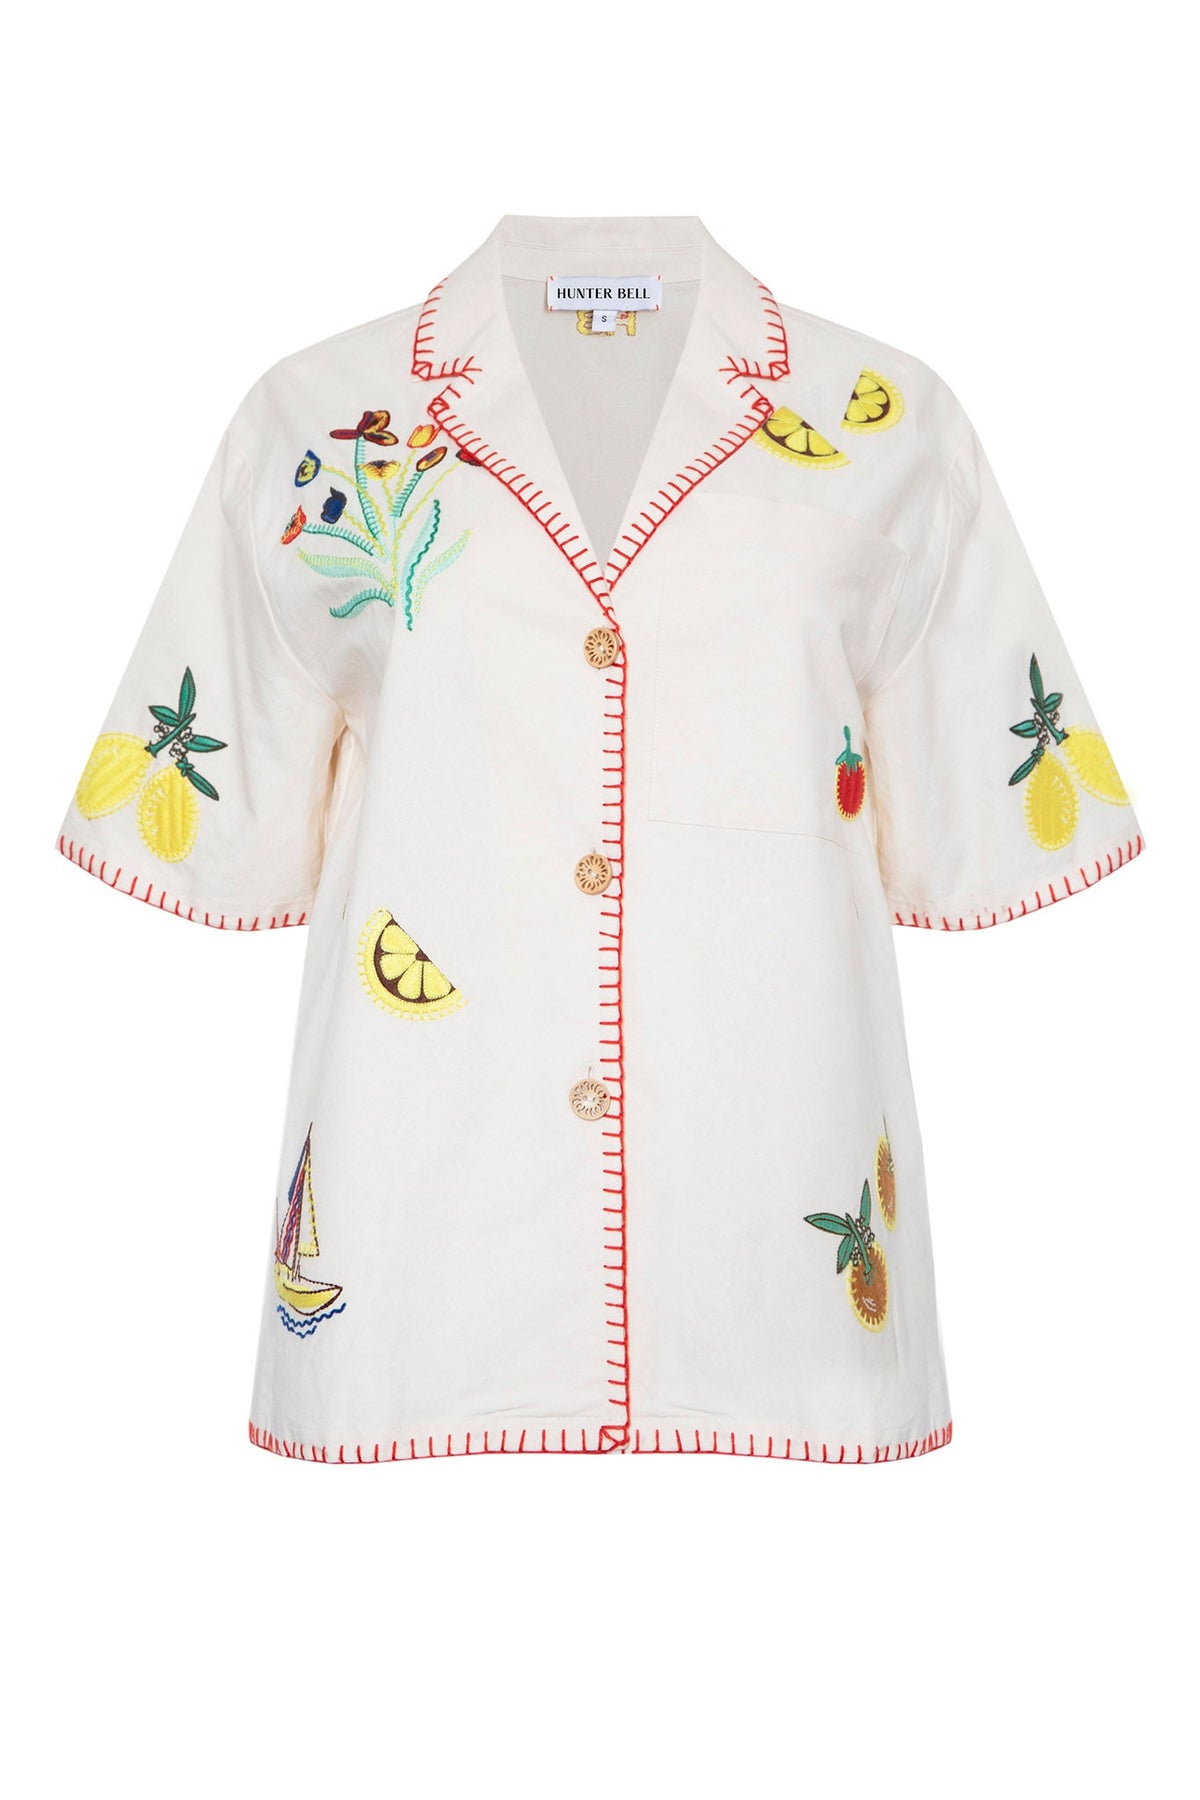 The Polly shirt is a collared short sleeve embroidered camp shirt with whipstich detailing. 